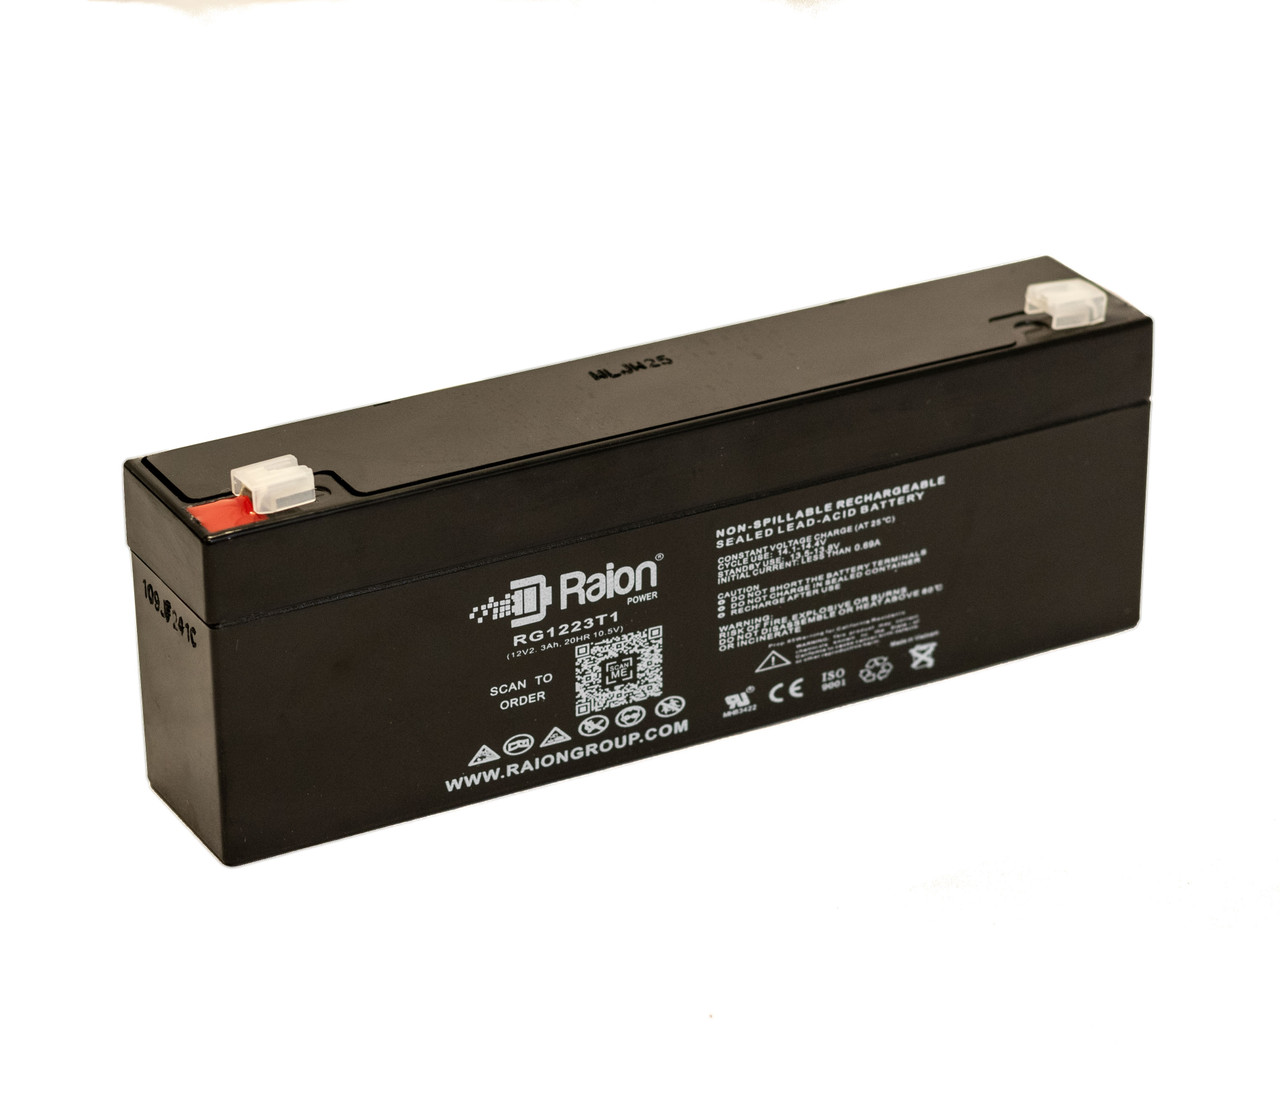 Raion Power RG1223T1 Replacement Battery for Datex-Ohmeda 3740, 3760 Oximeter